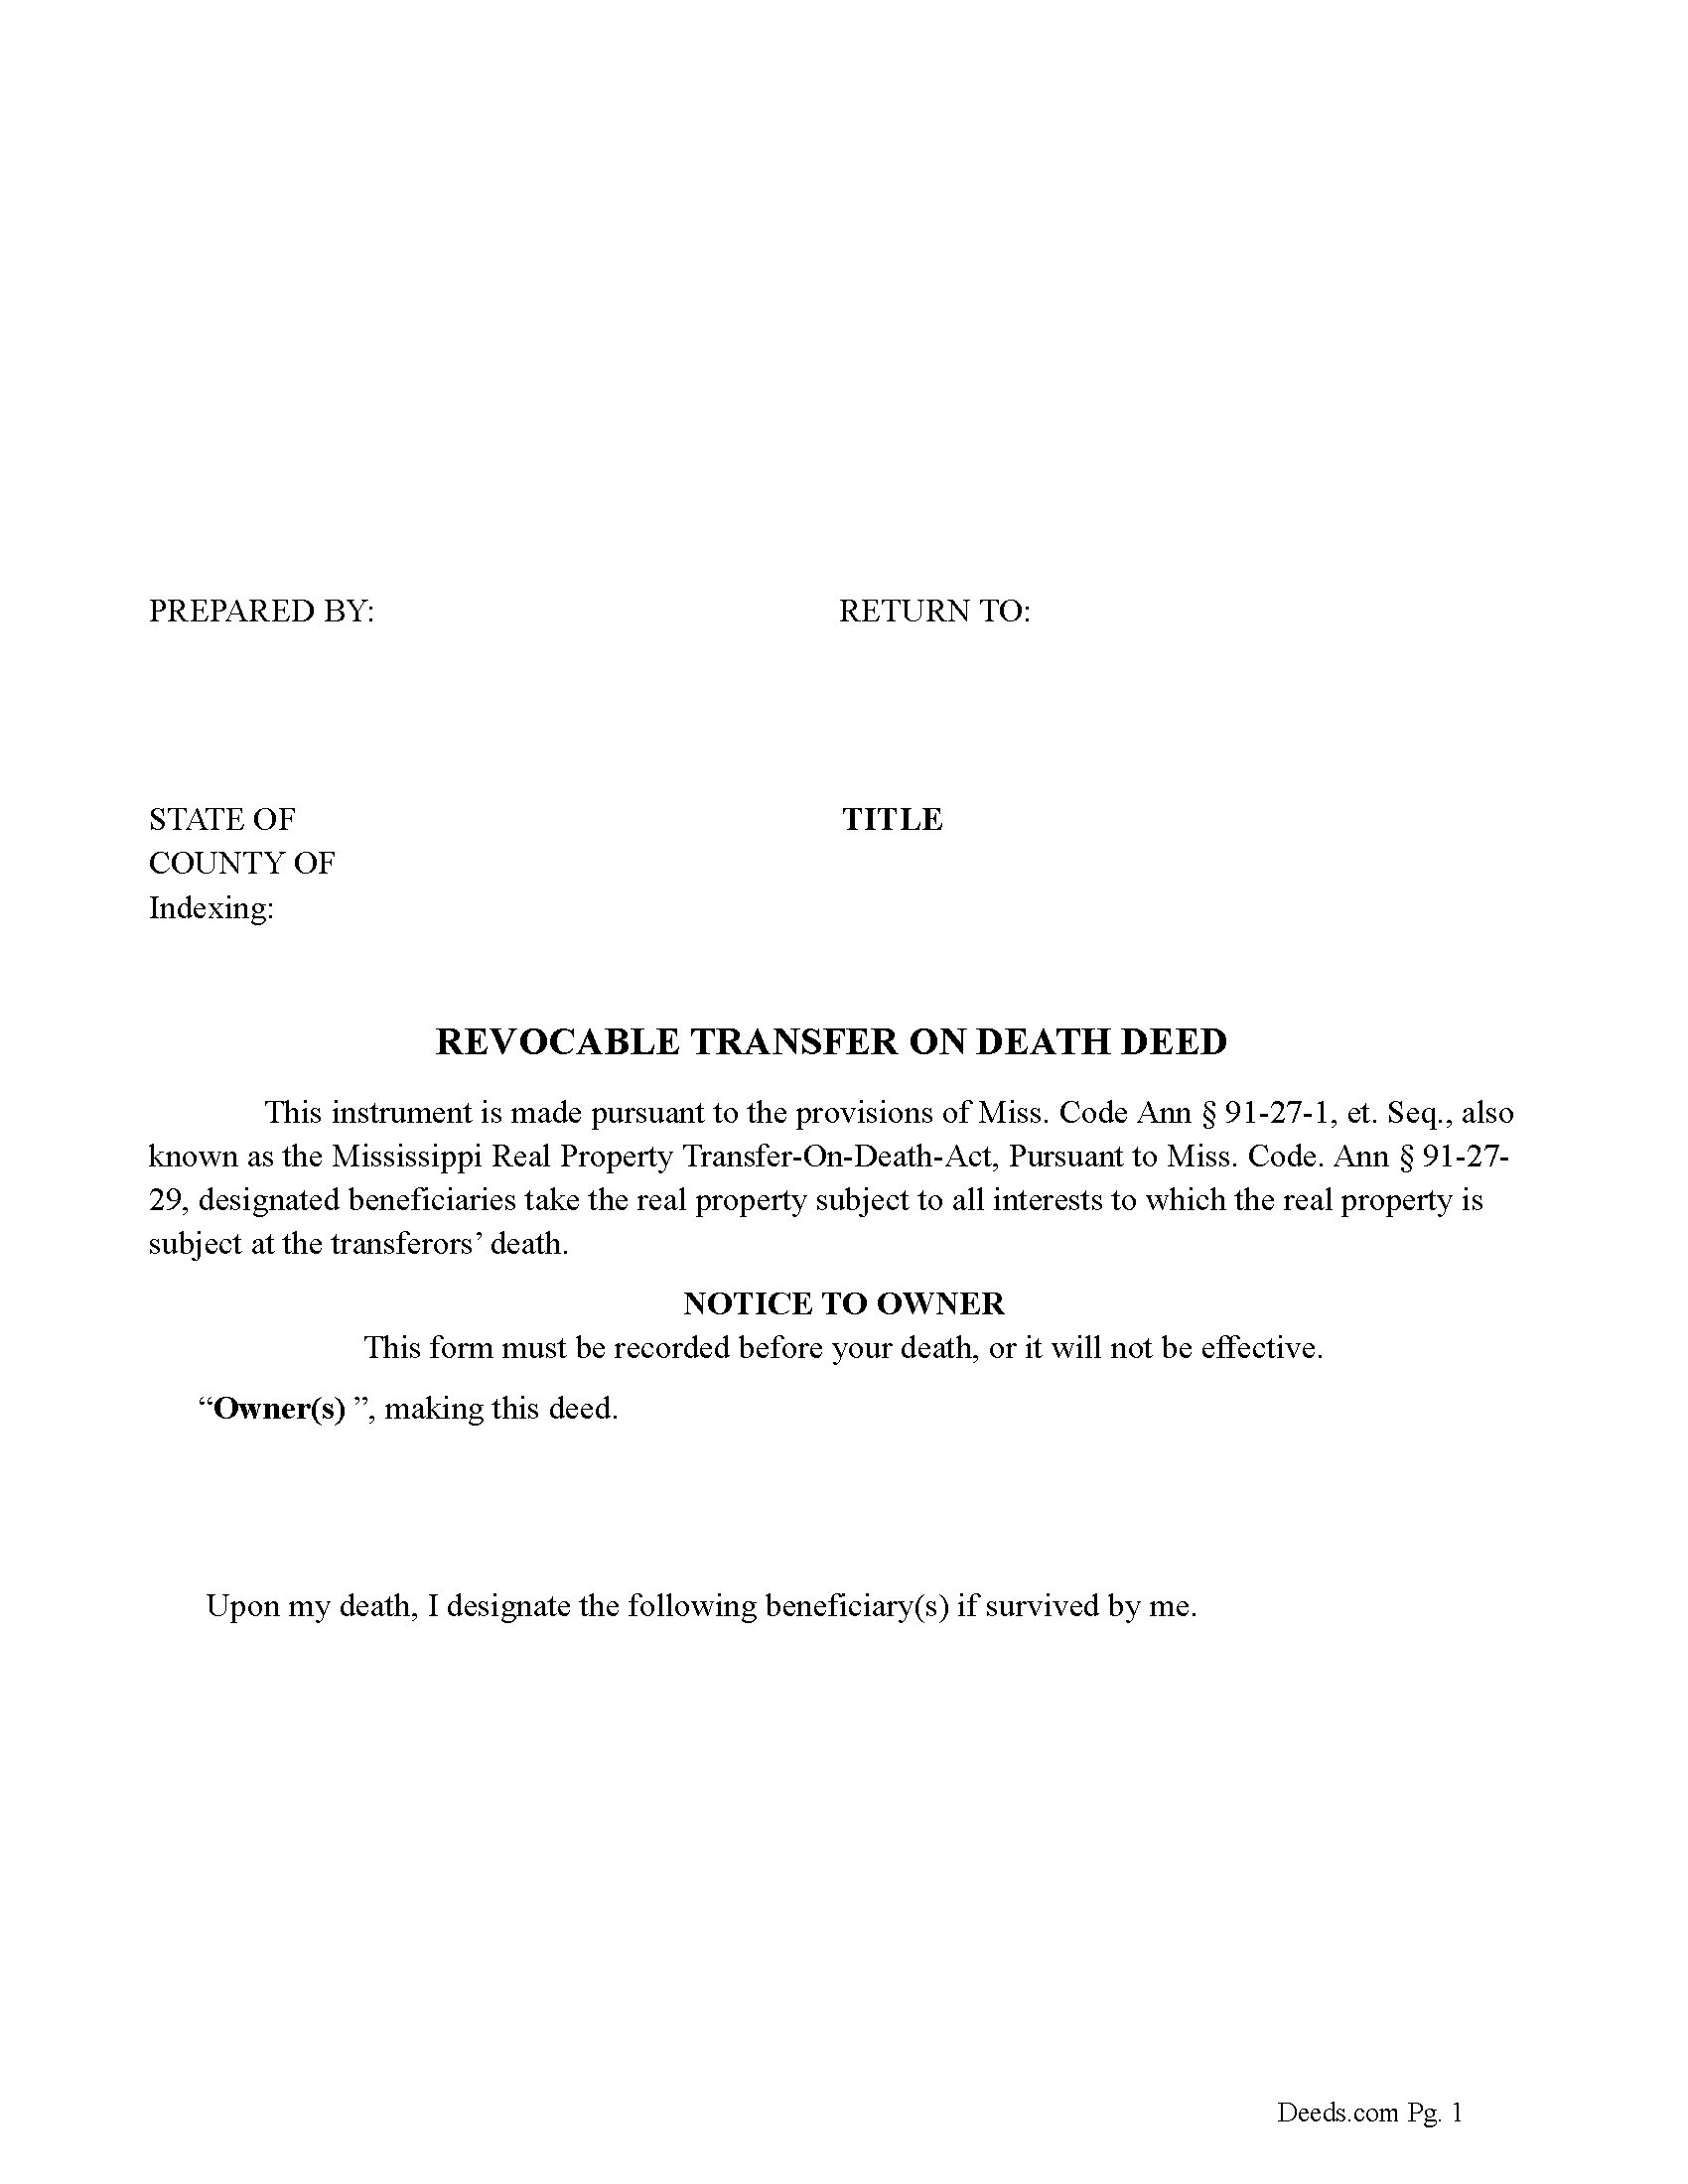 Mississippi Revocable Transfer on Death Deed Image